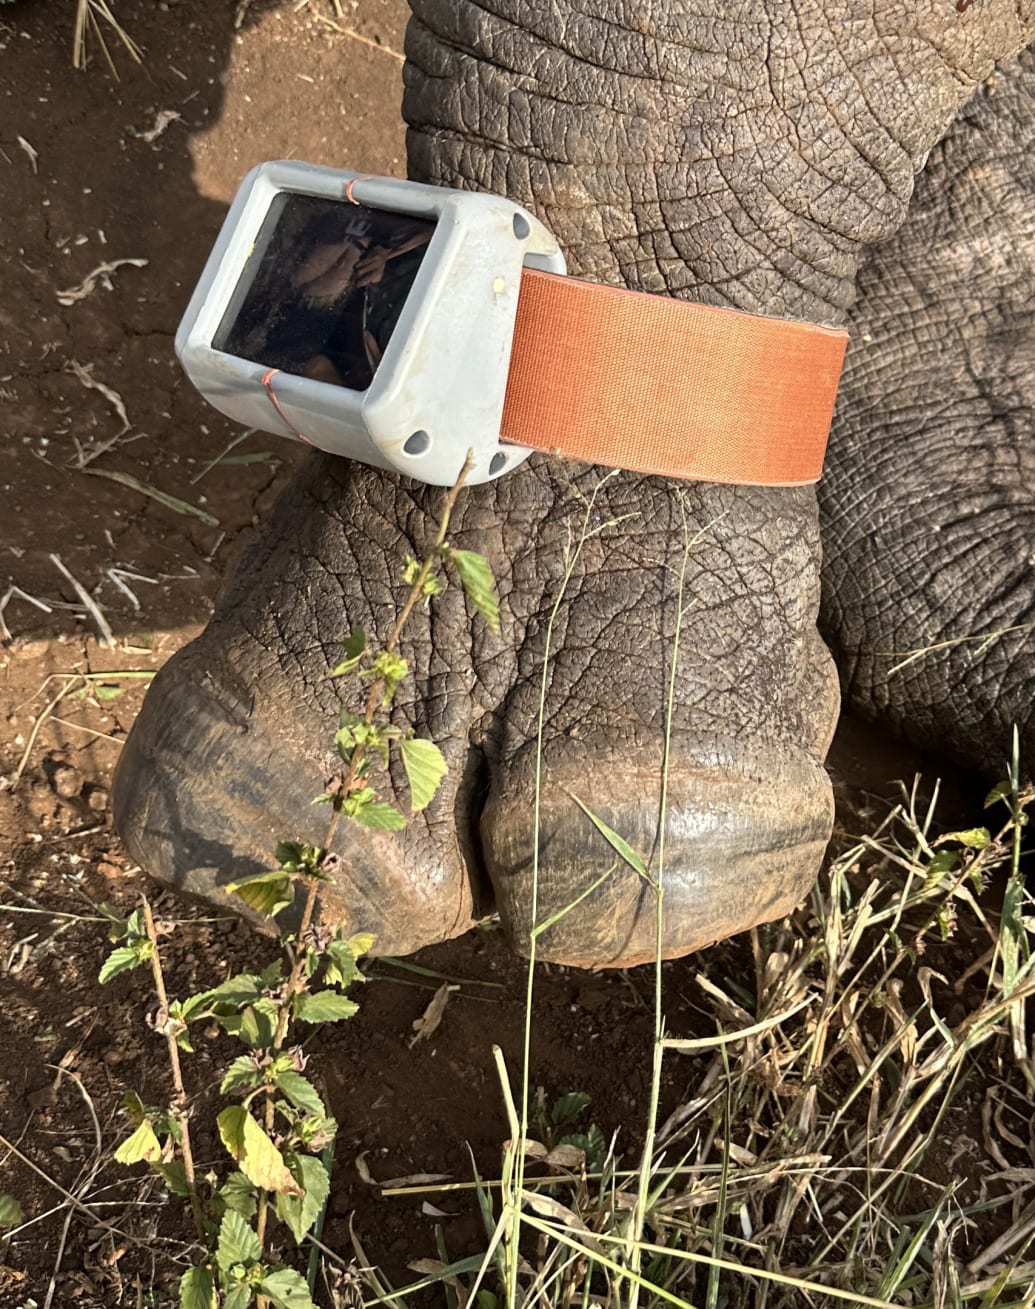 A rhino is being fitted with the RhinoWatch collar